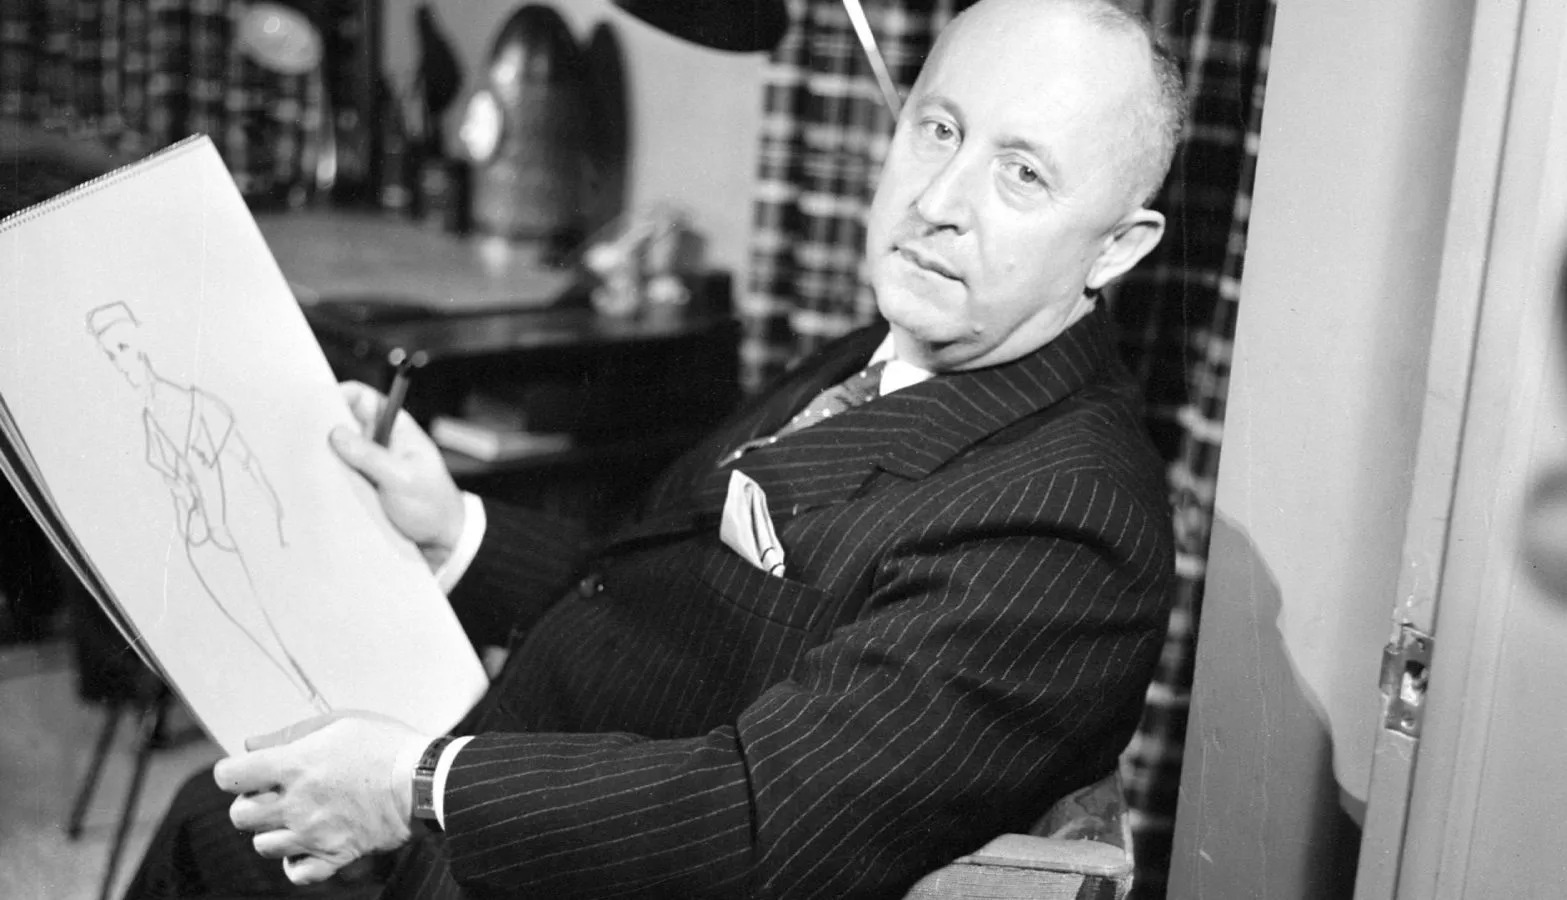 20 Unbelievable Facts About Christian Dior - Facts.net